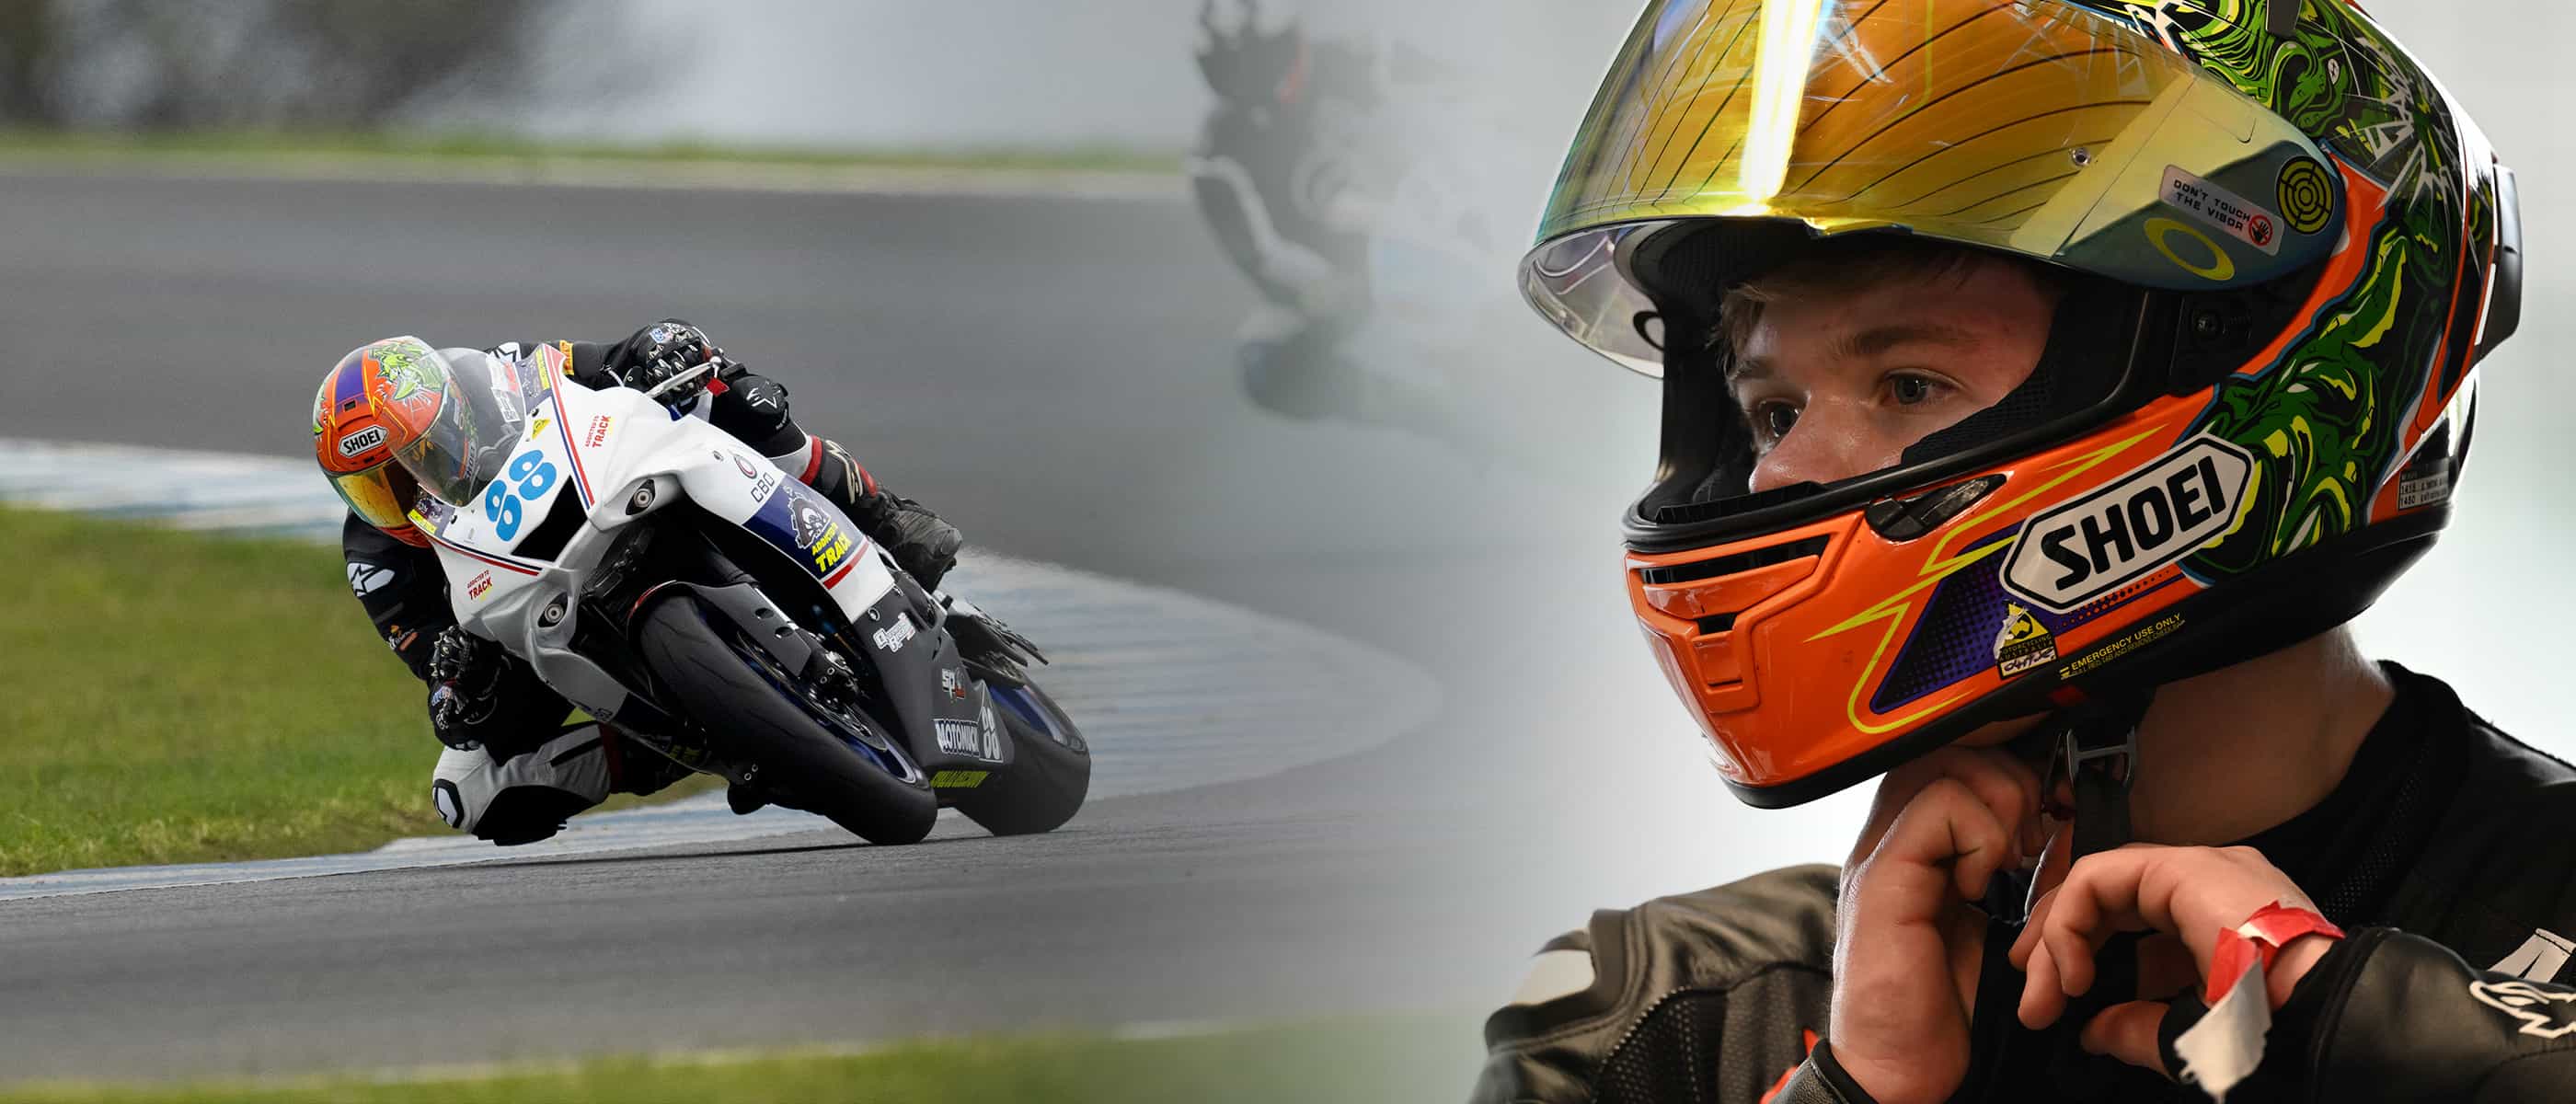 collage photo of a motorcycle rider on a bike on a track and a close up of the rider, taken with the NIKKOR Z 600mm f/4 TC VR S lens.